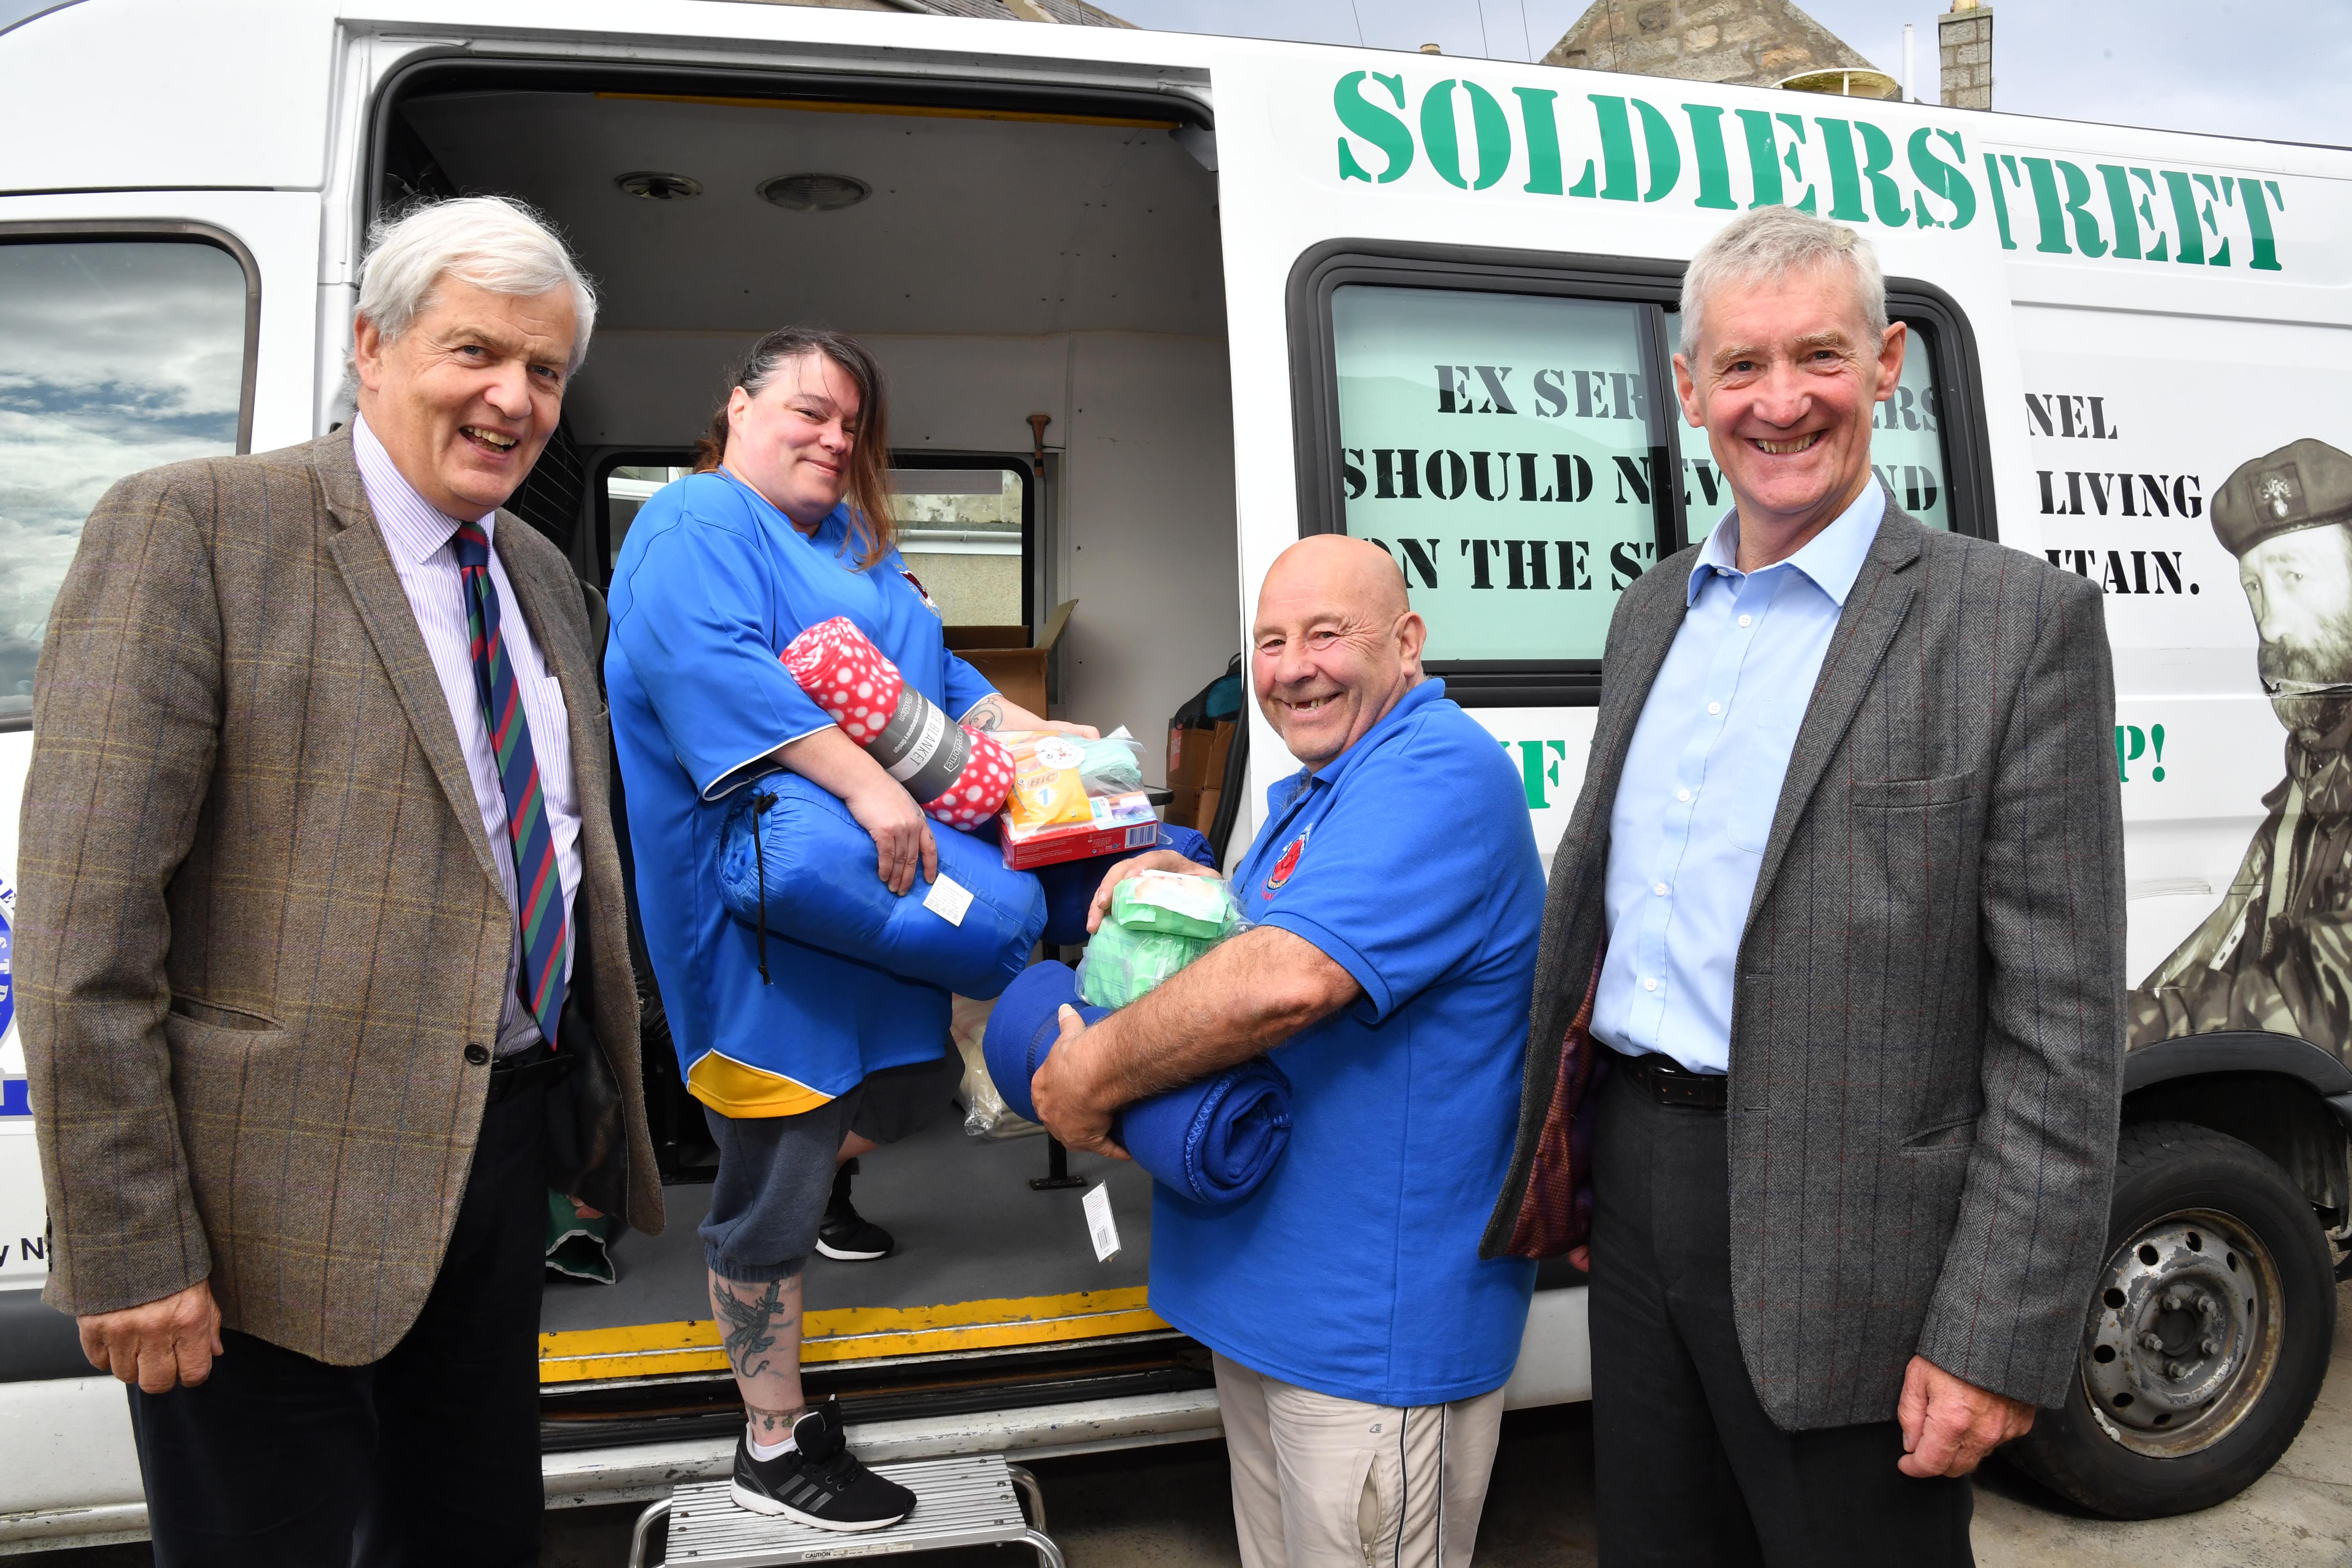 MSPs Maurice Corry (l) and Peter Chapman watch Privates on Parade volunteers Elaine Mitchell and James Grieve loading sleeping bags, blankets and hygiene kits destined for homeless veterans.